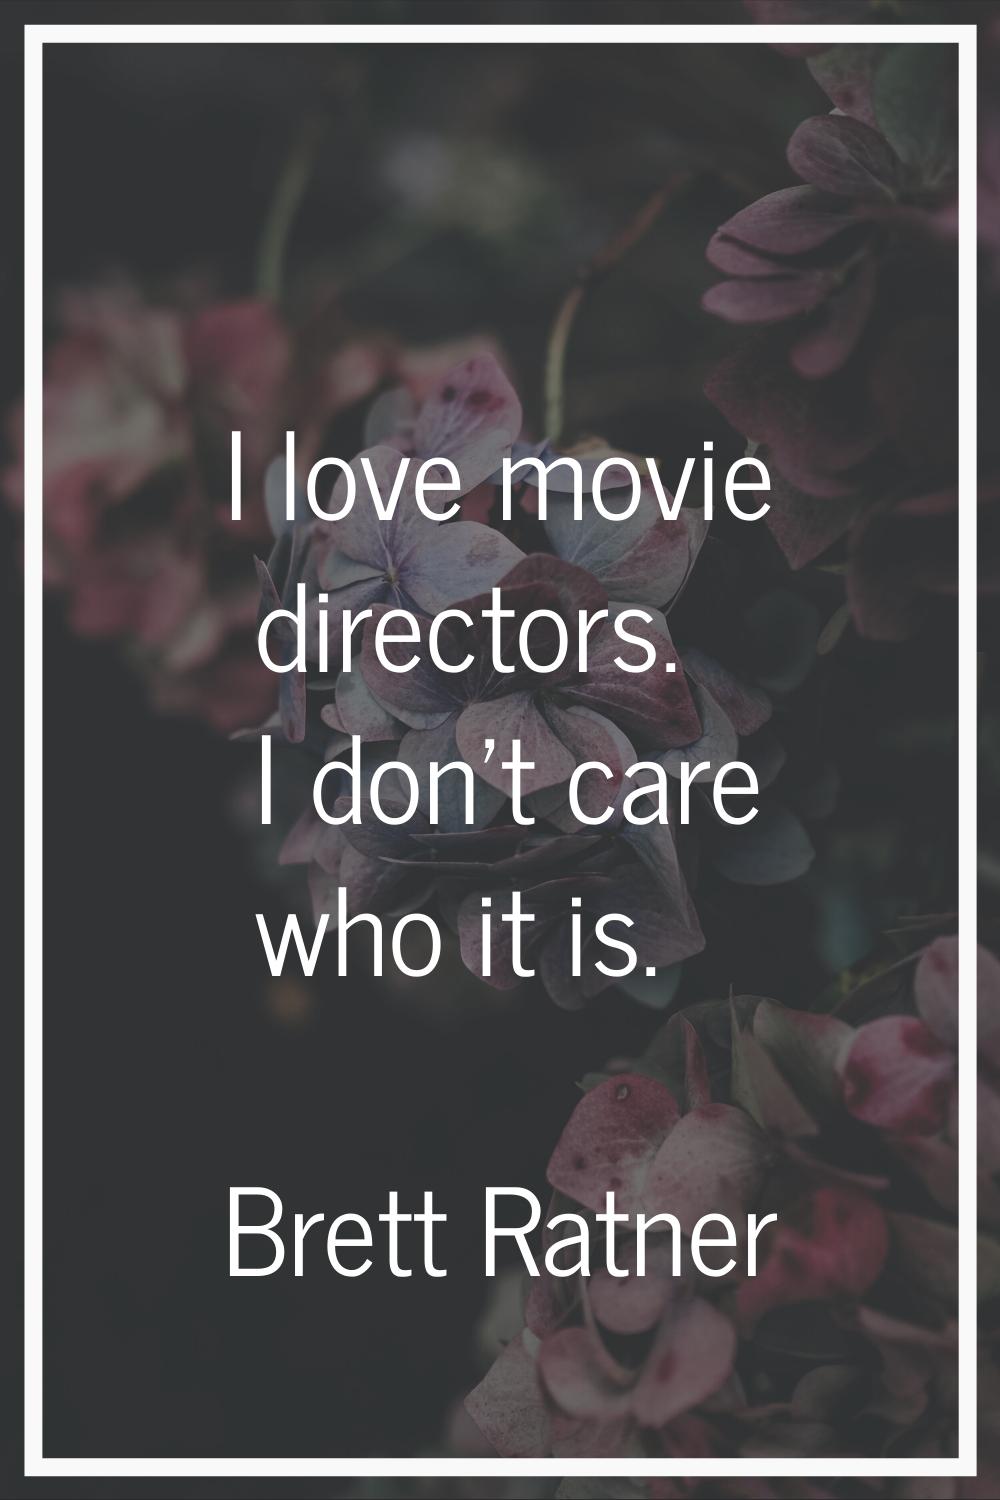 I love movie directors. I don't care who it is.